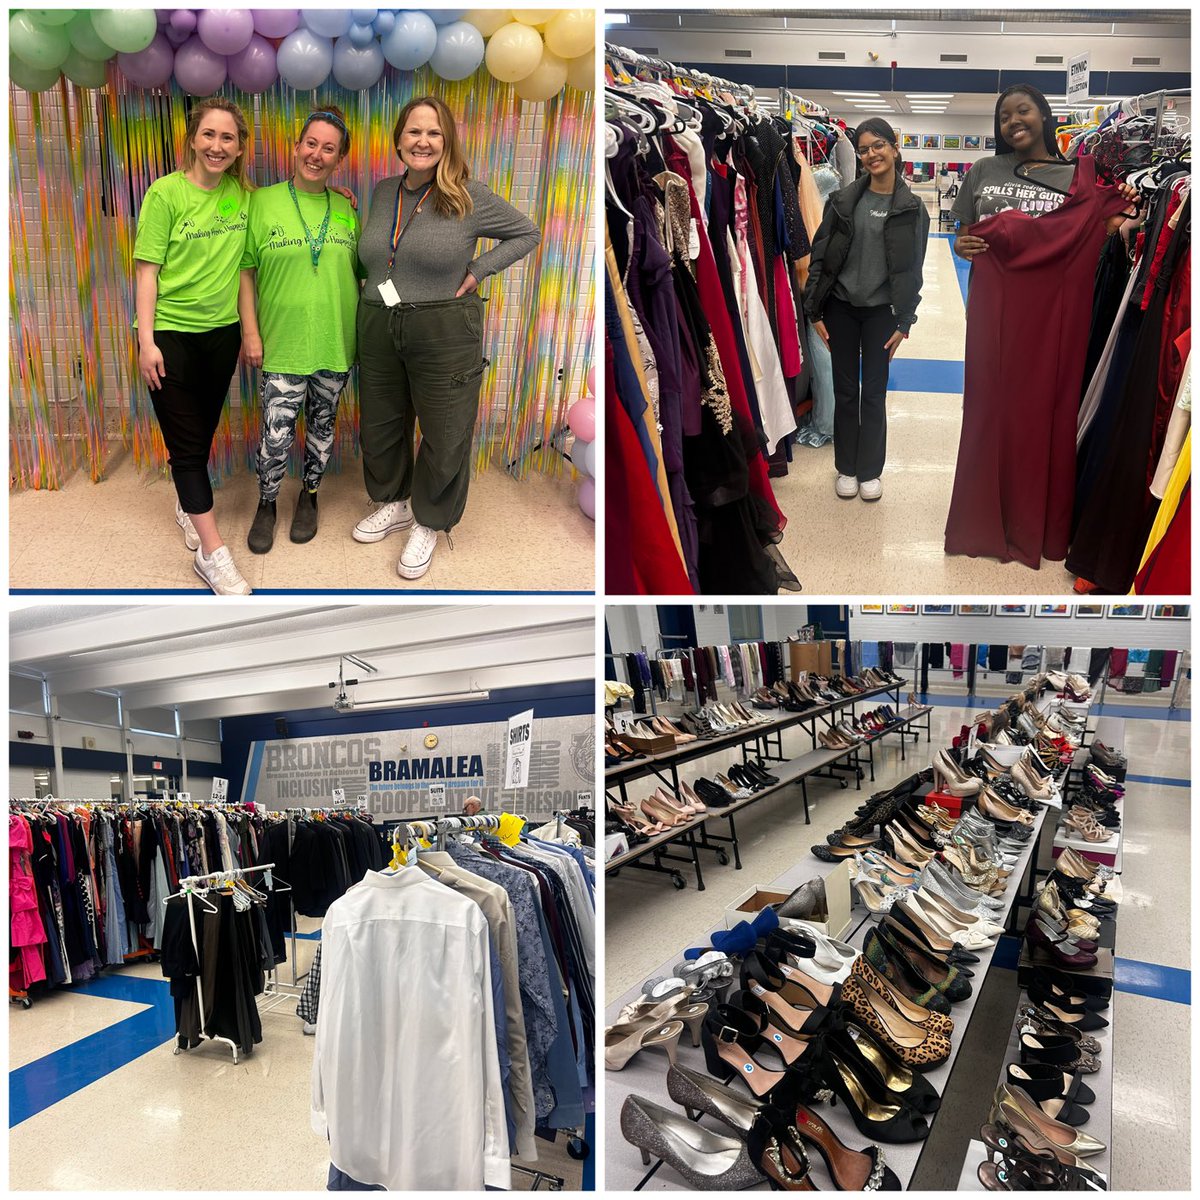 ⁦@Bramalea_SS⁩ Making Prom Happen! Event tonight from 3:30pm. Come pick out a gorgeous dress,suit or accessories. Thanks to all the volunteers! ⁦@PeelSchools⁩